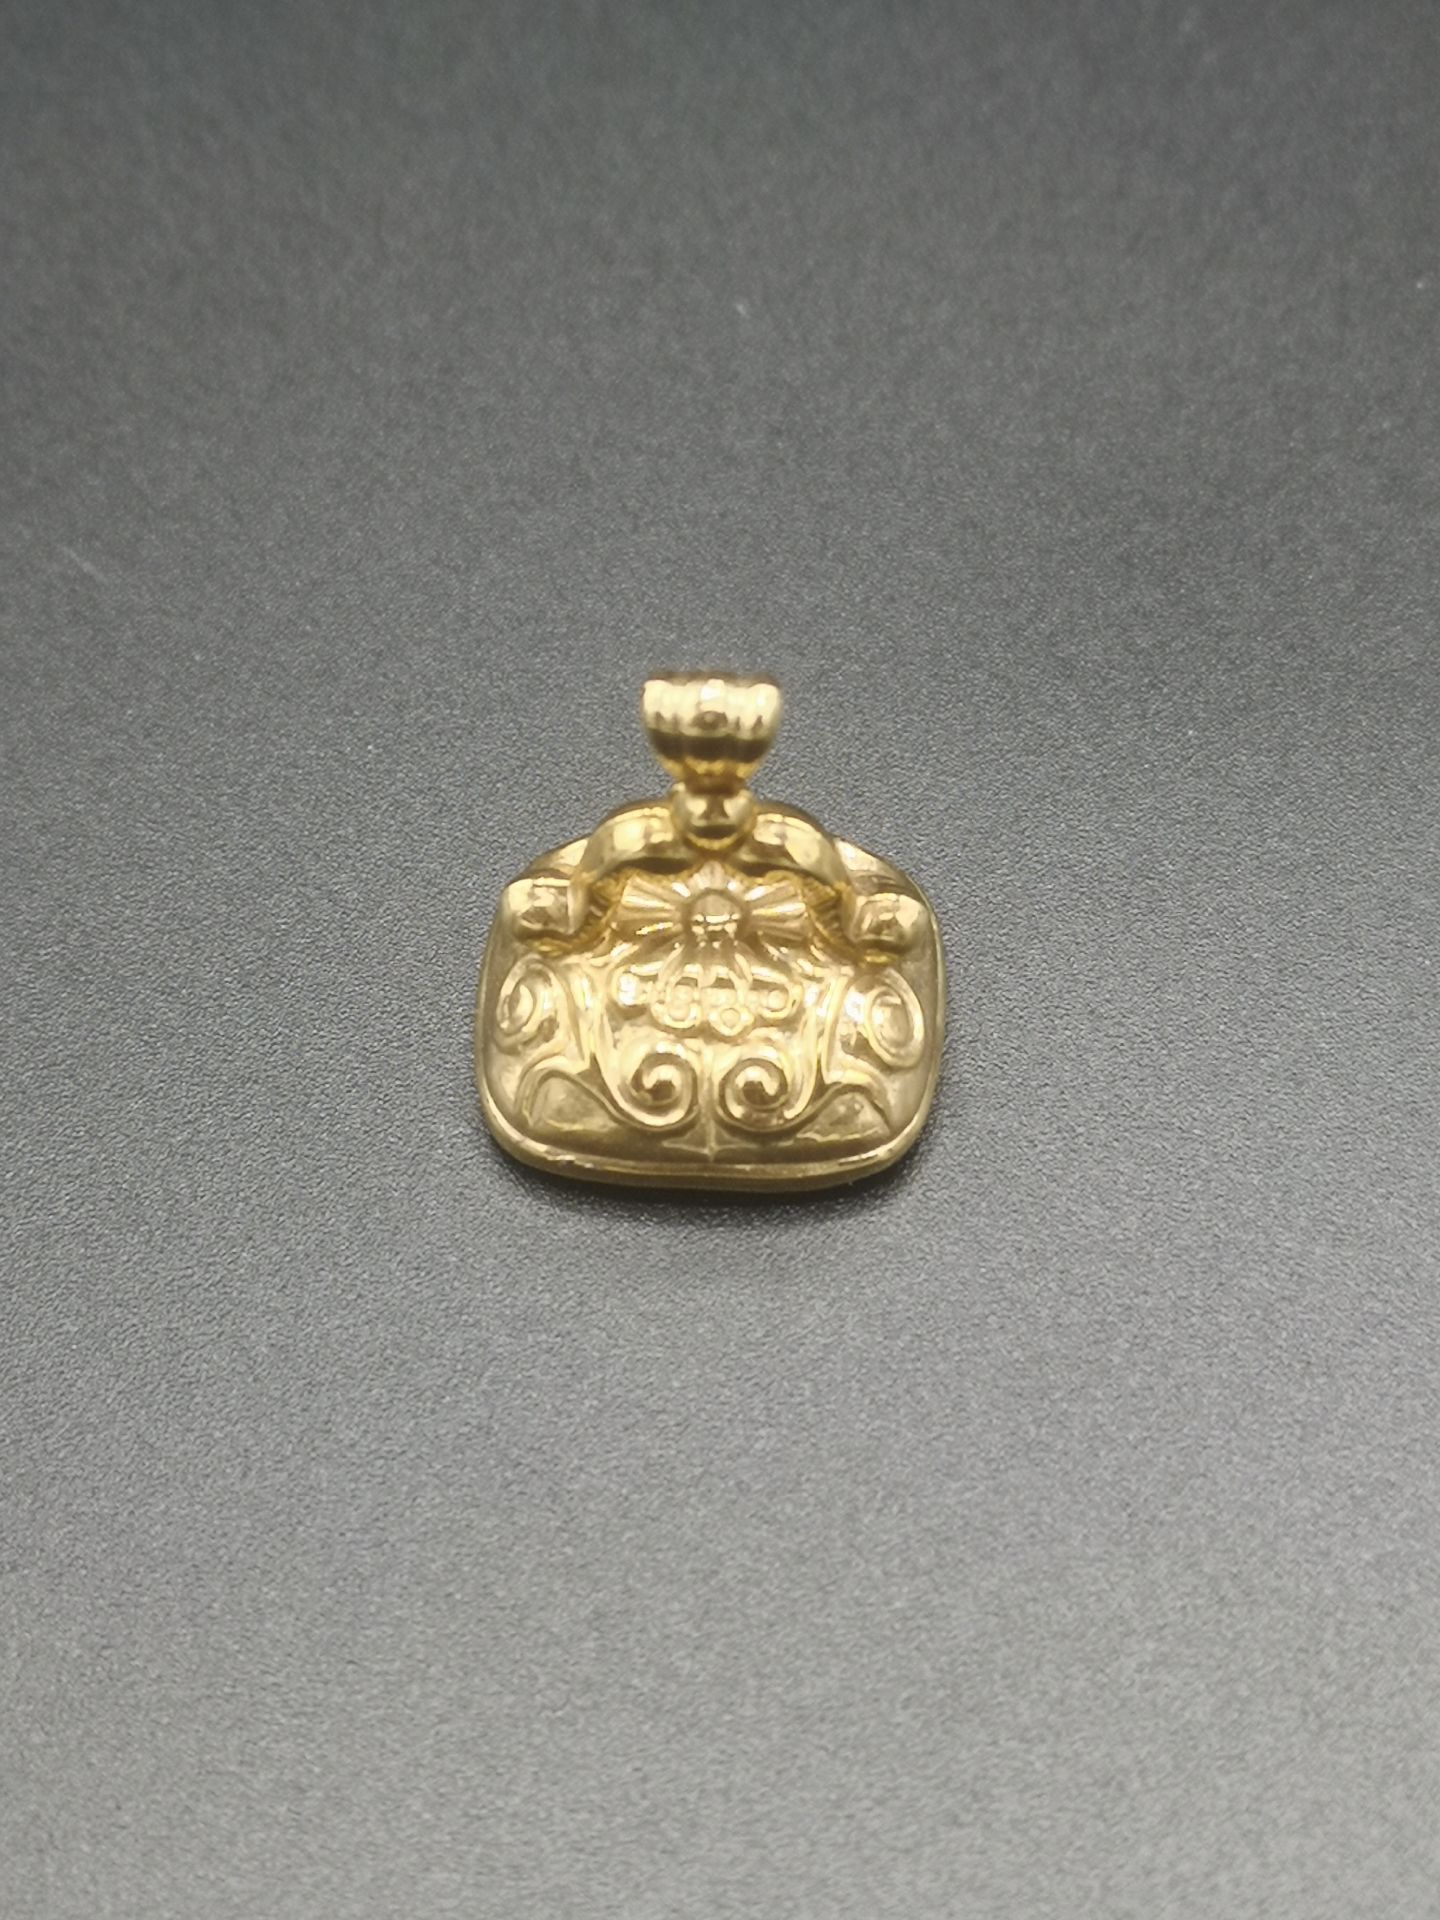 9ct gold fob seal - Image 3 of 4